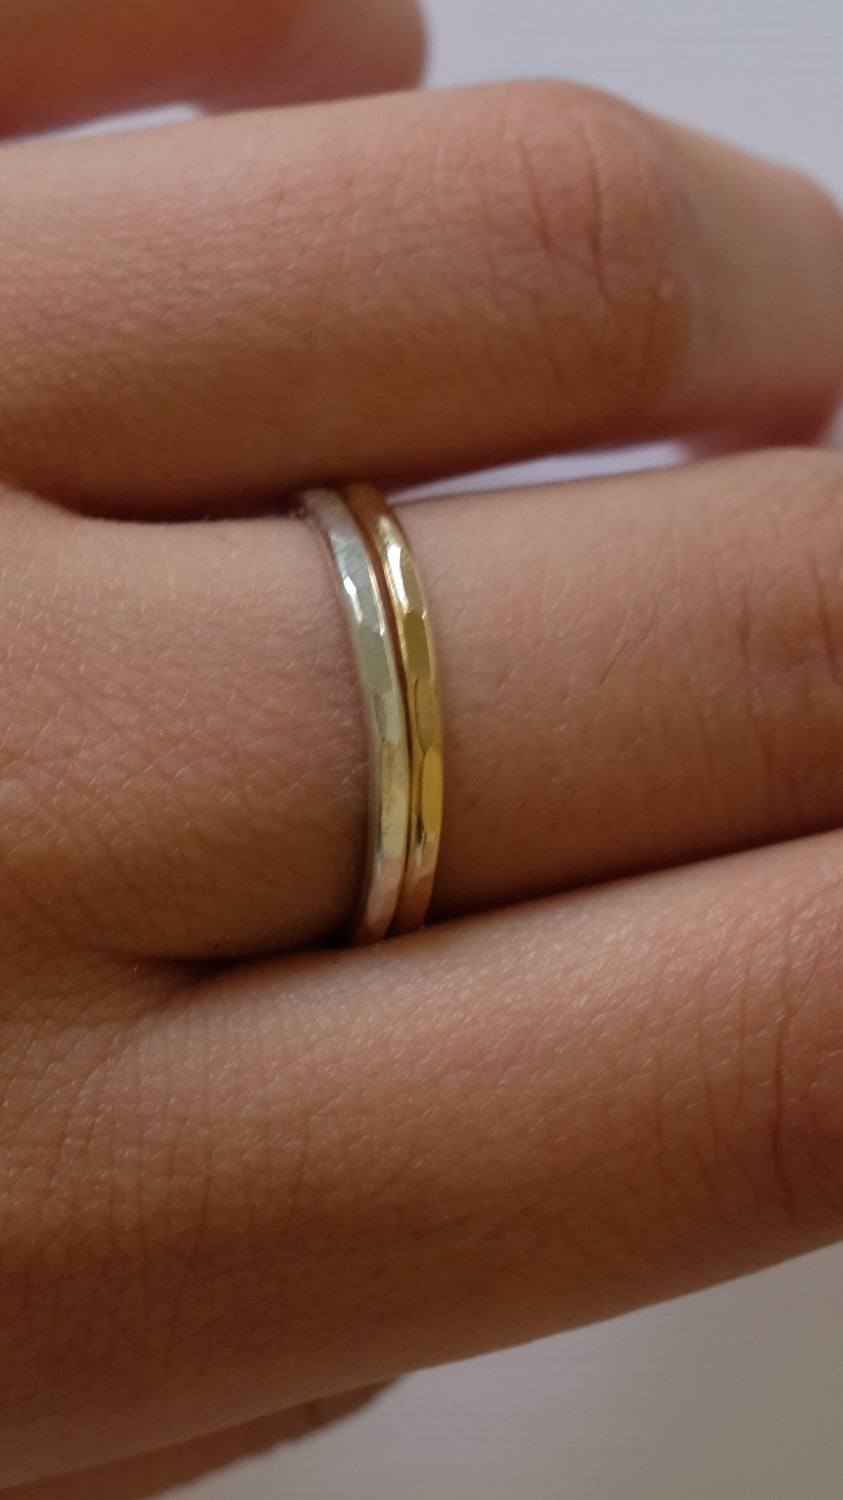 Sloane Jewelry Design Hammered Stacking Rings